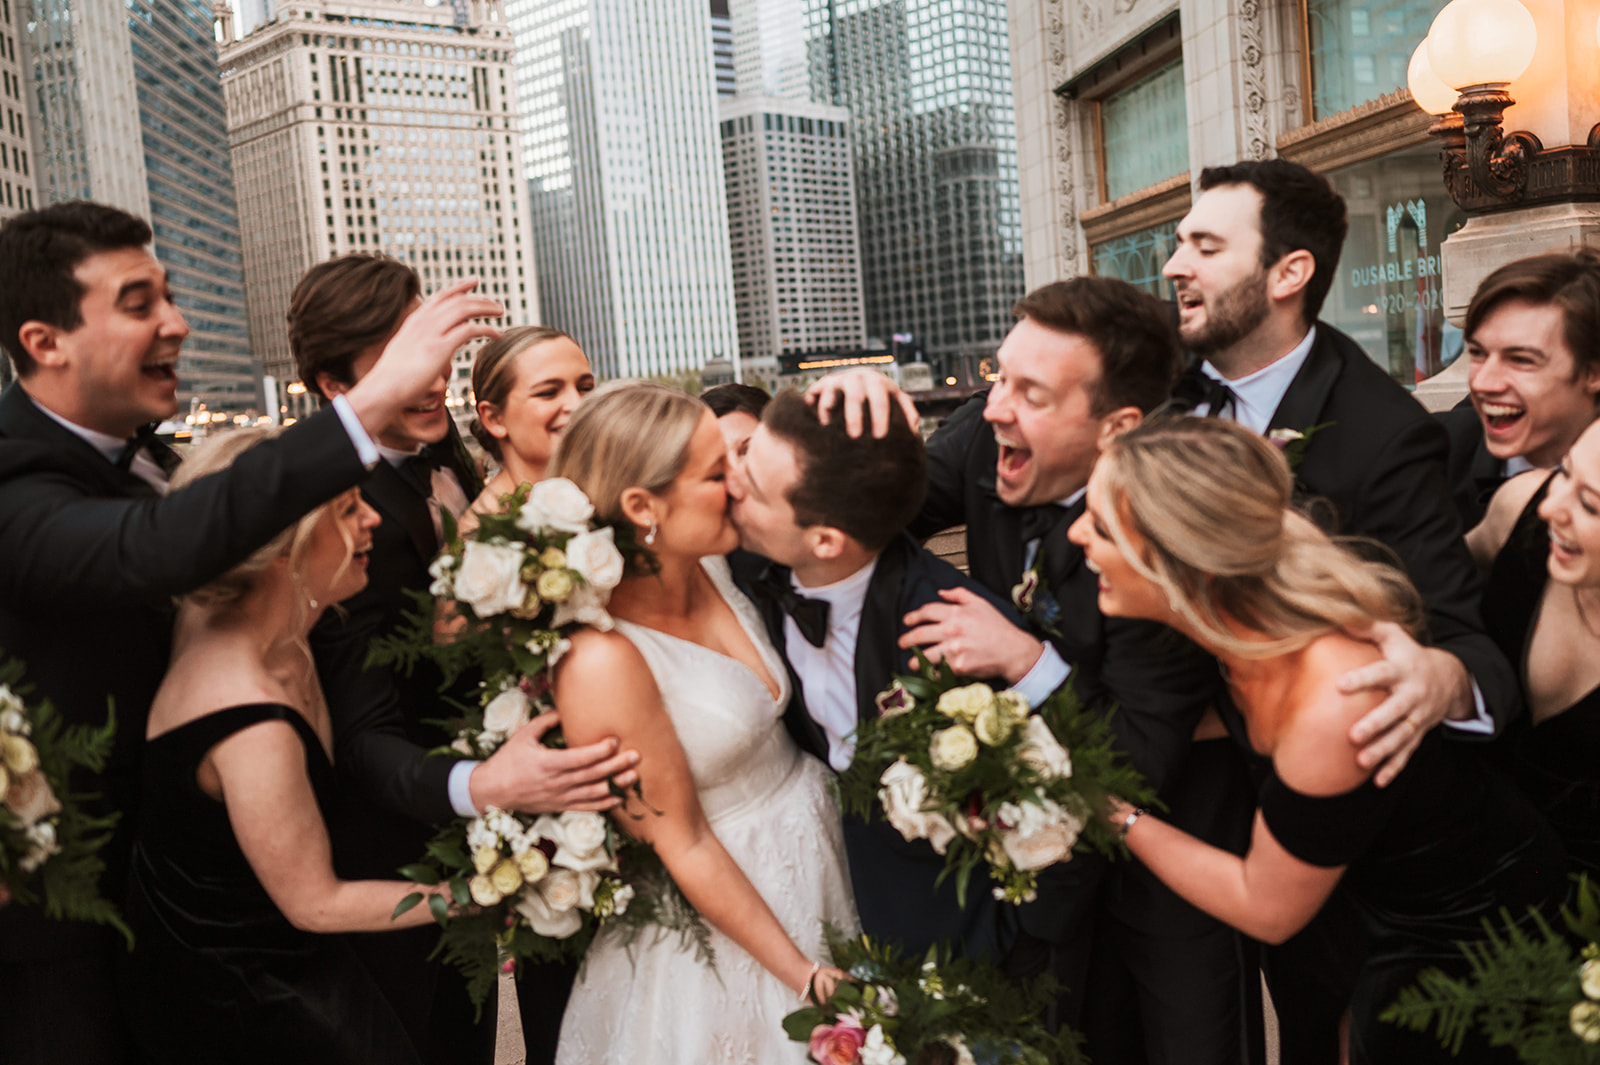 wedding party at the end of the winter on riverwalk by the Wrigley building chicago group hug